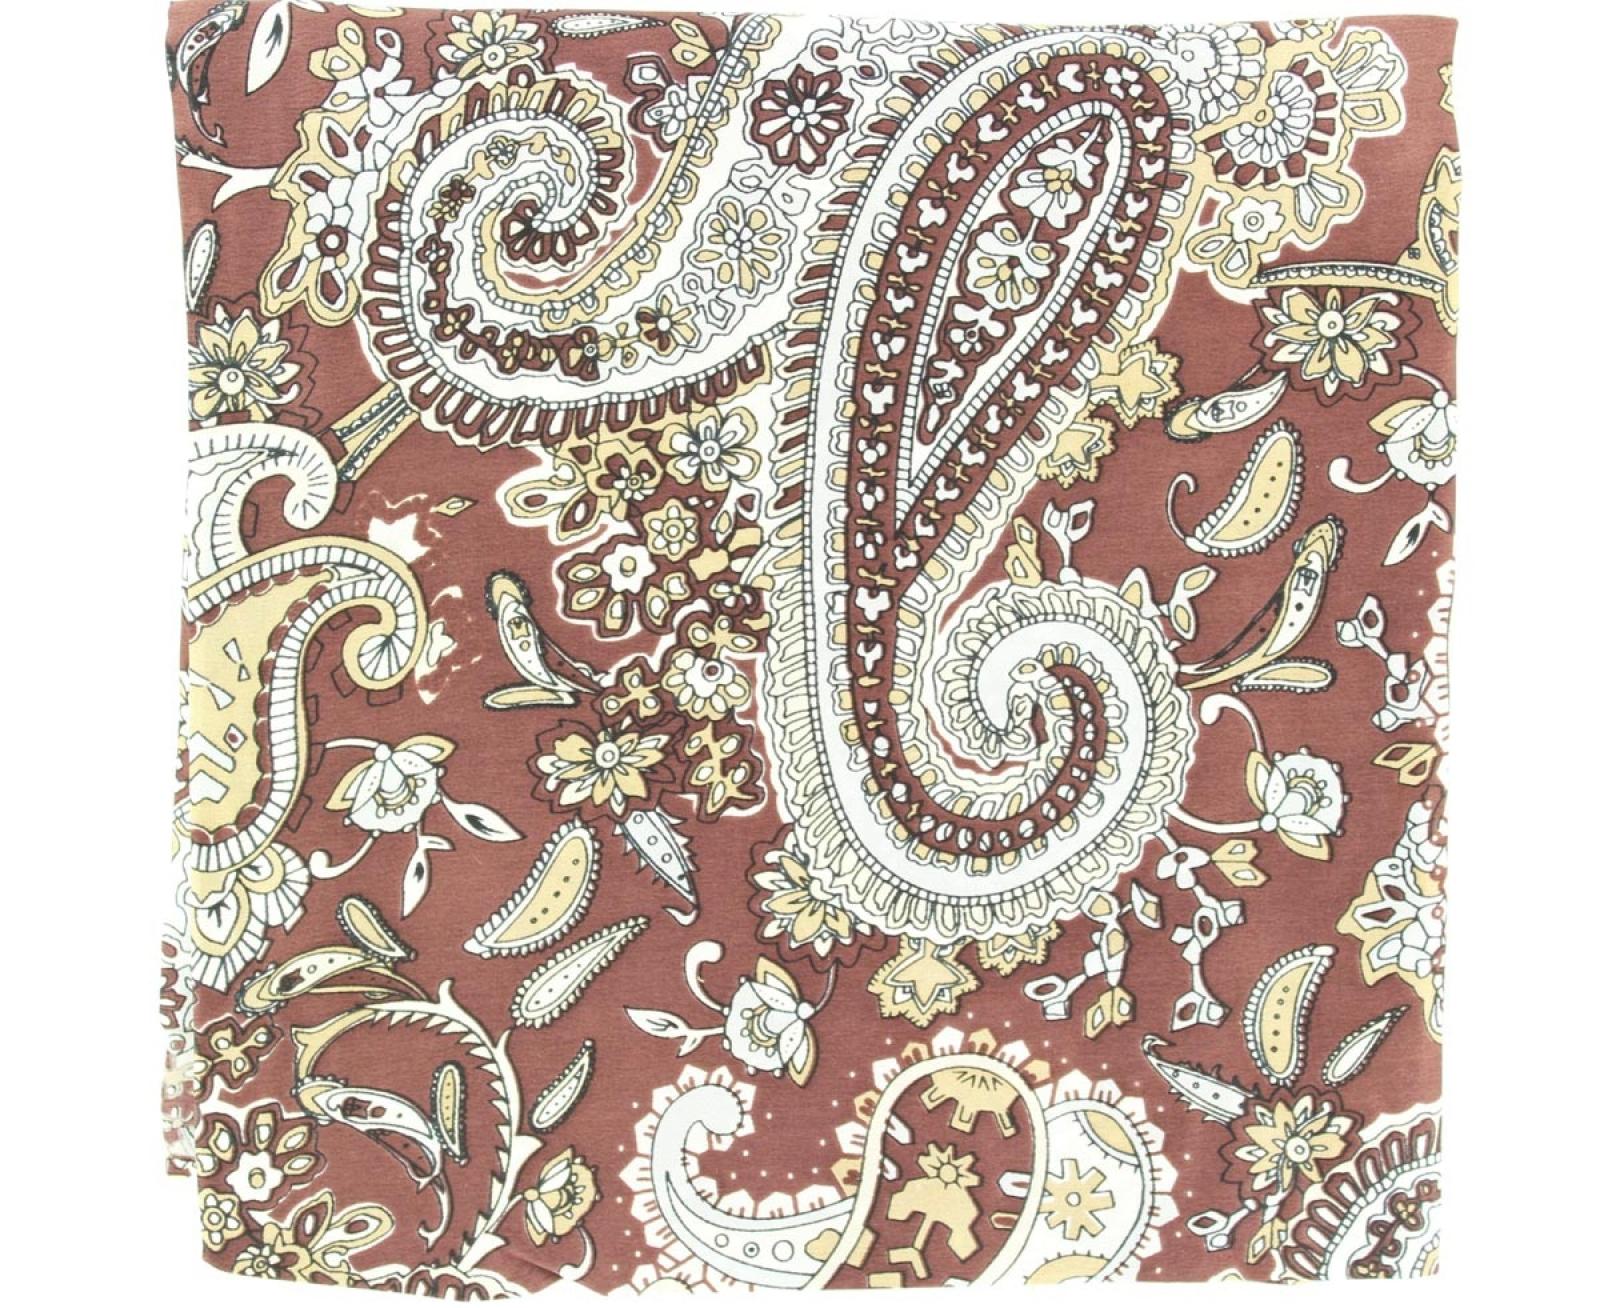 M&F Western Products Paisley Wild Rags Brown